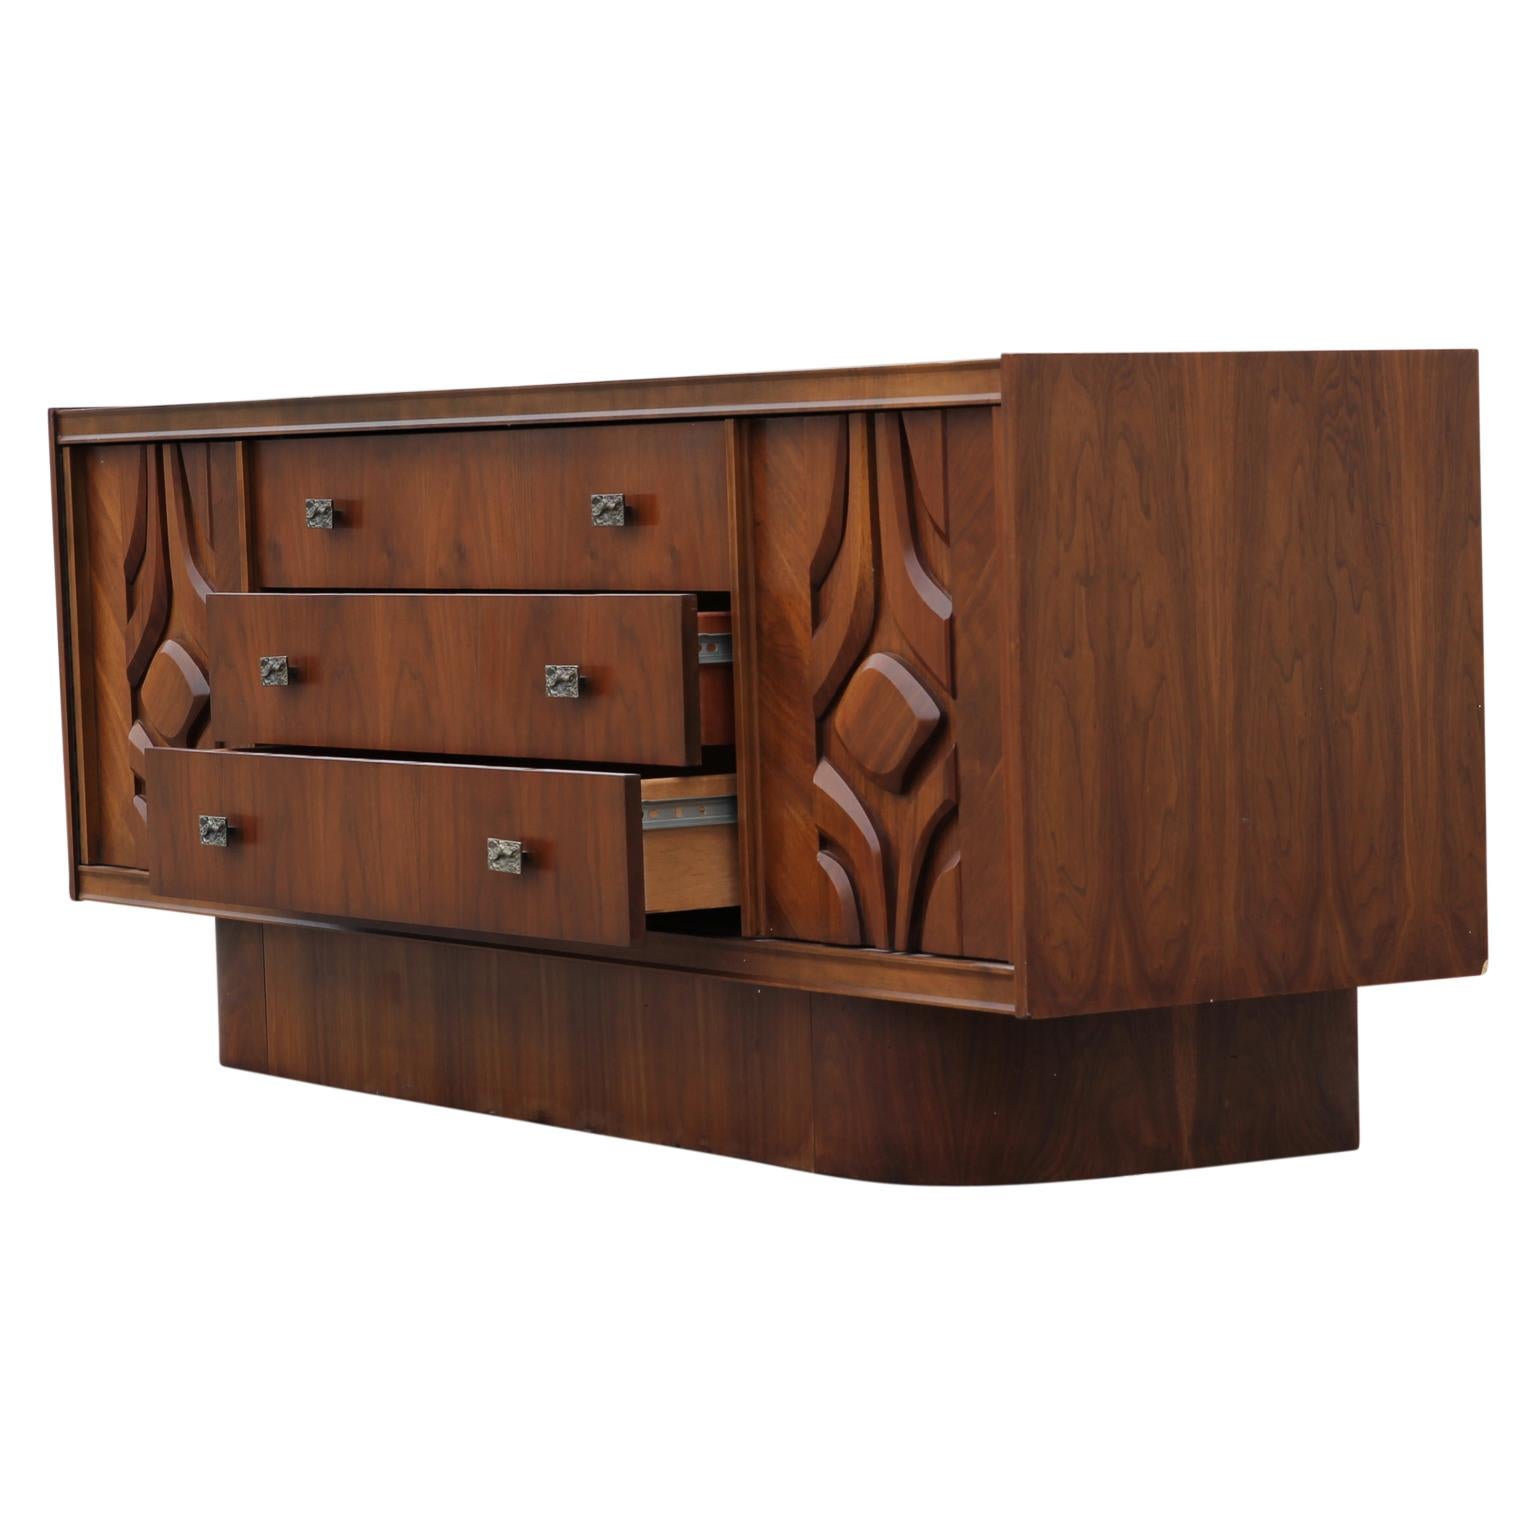 Carved walnut sideboard or credenza in the style of John Widdicomb. The sideboard has three large pull out drawers and two swing out cabinets on each side of the drawers. The knobs on the drawers are beautifully beveled.